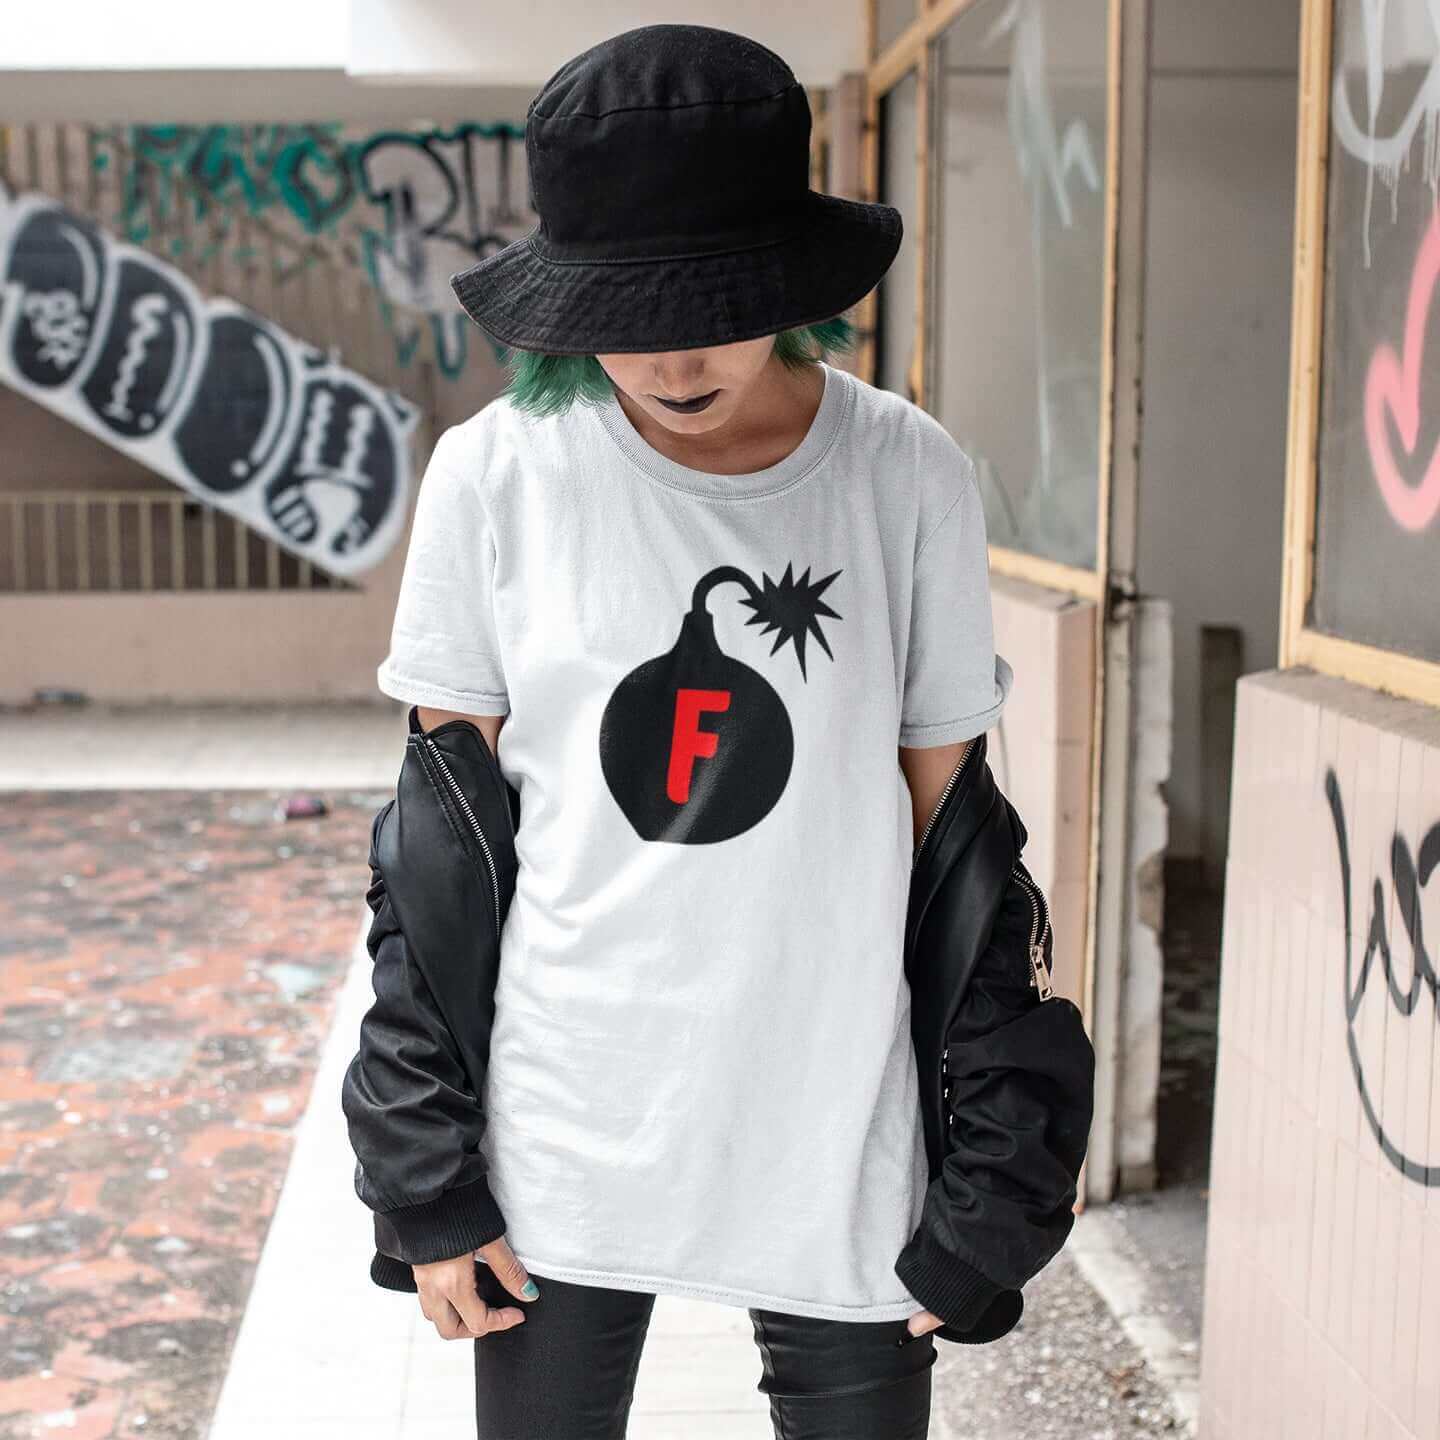 Woman wearing shite t-shirt with an image of a bomb with the letter F printed in the center. The graphics are printed on the front of the shirt.